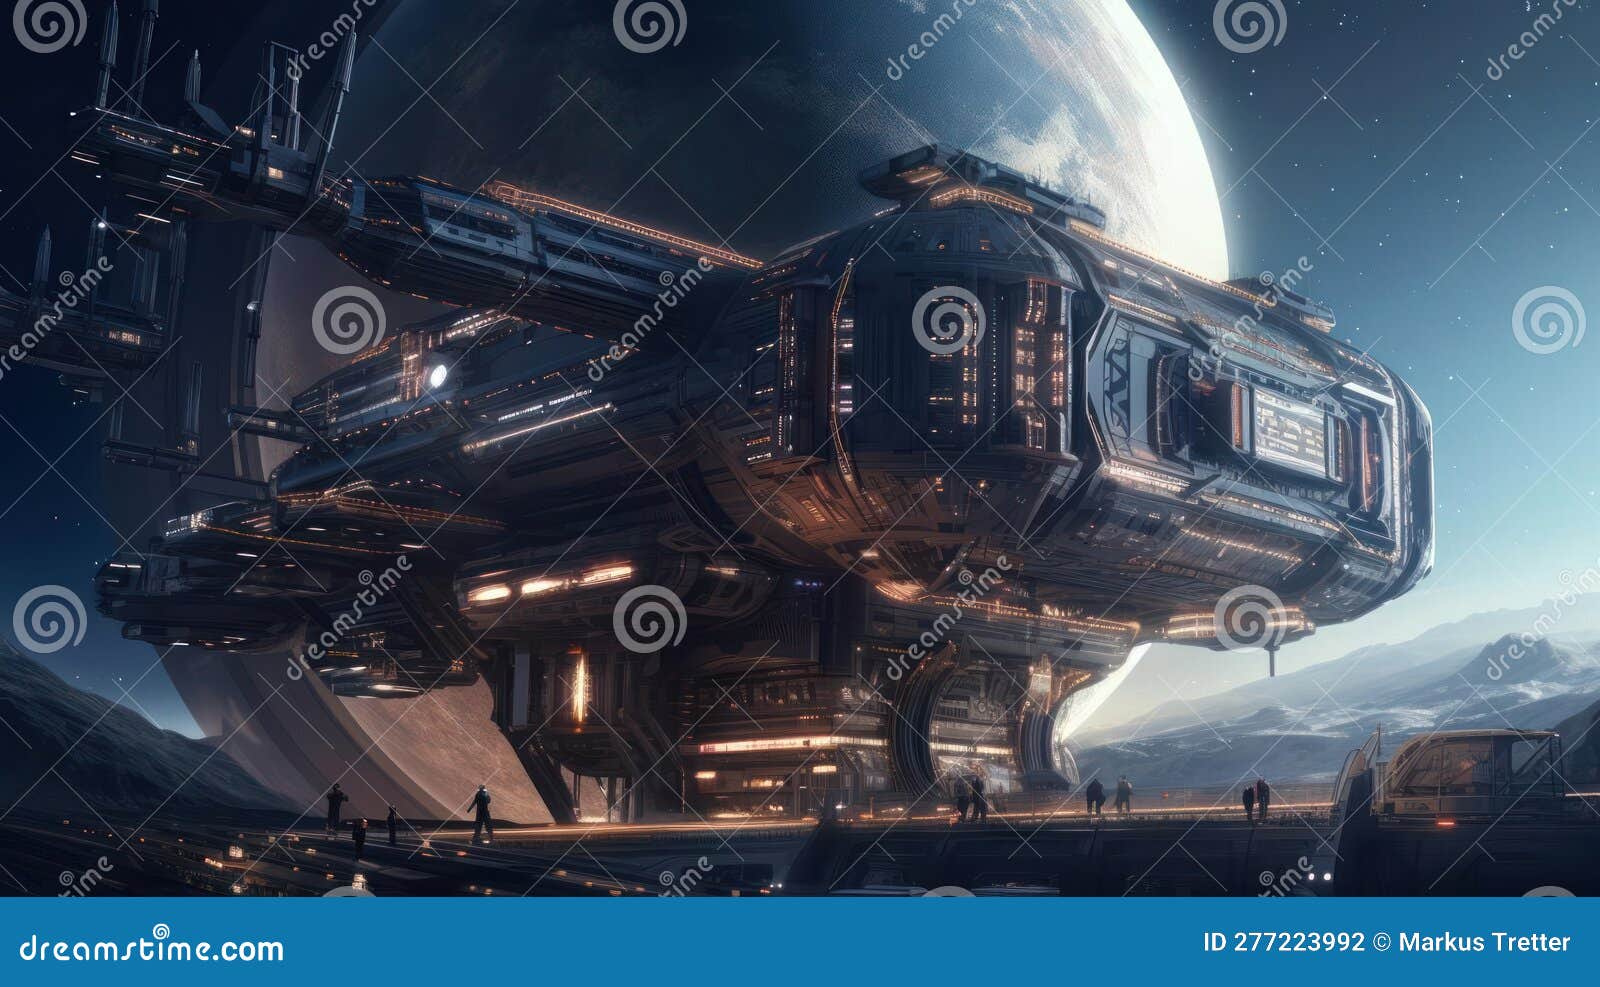 Futuristic Space Station Wall Mural Wallpaper